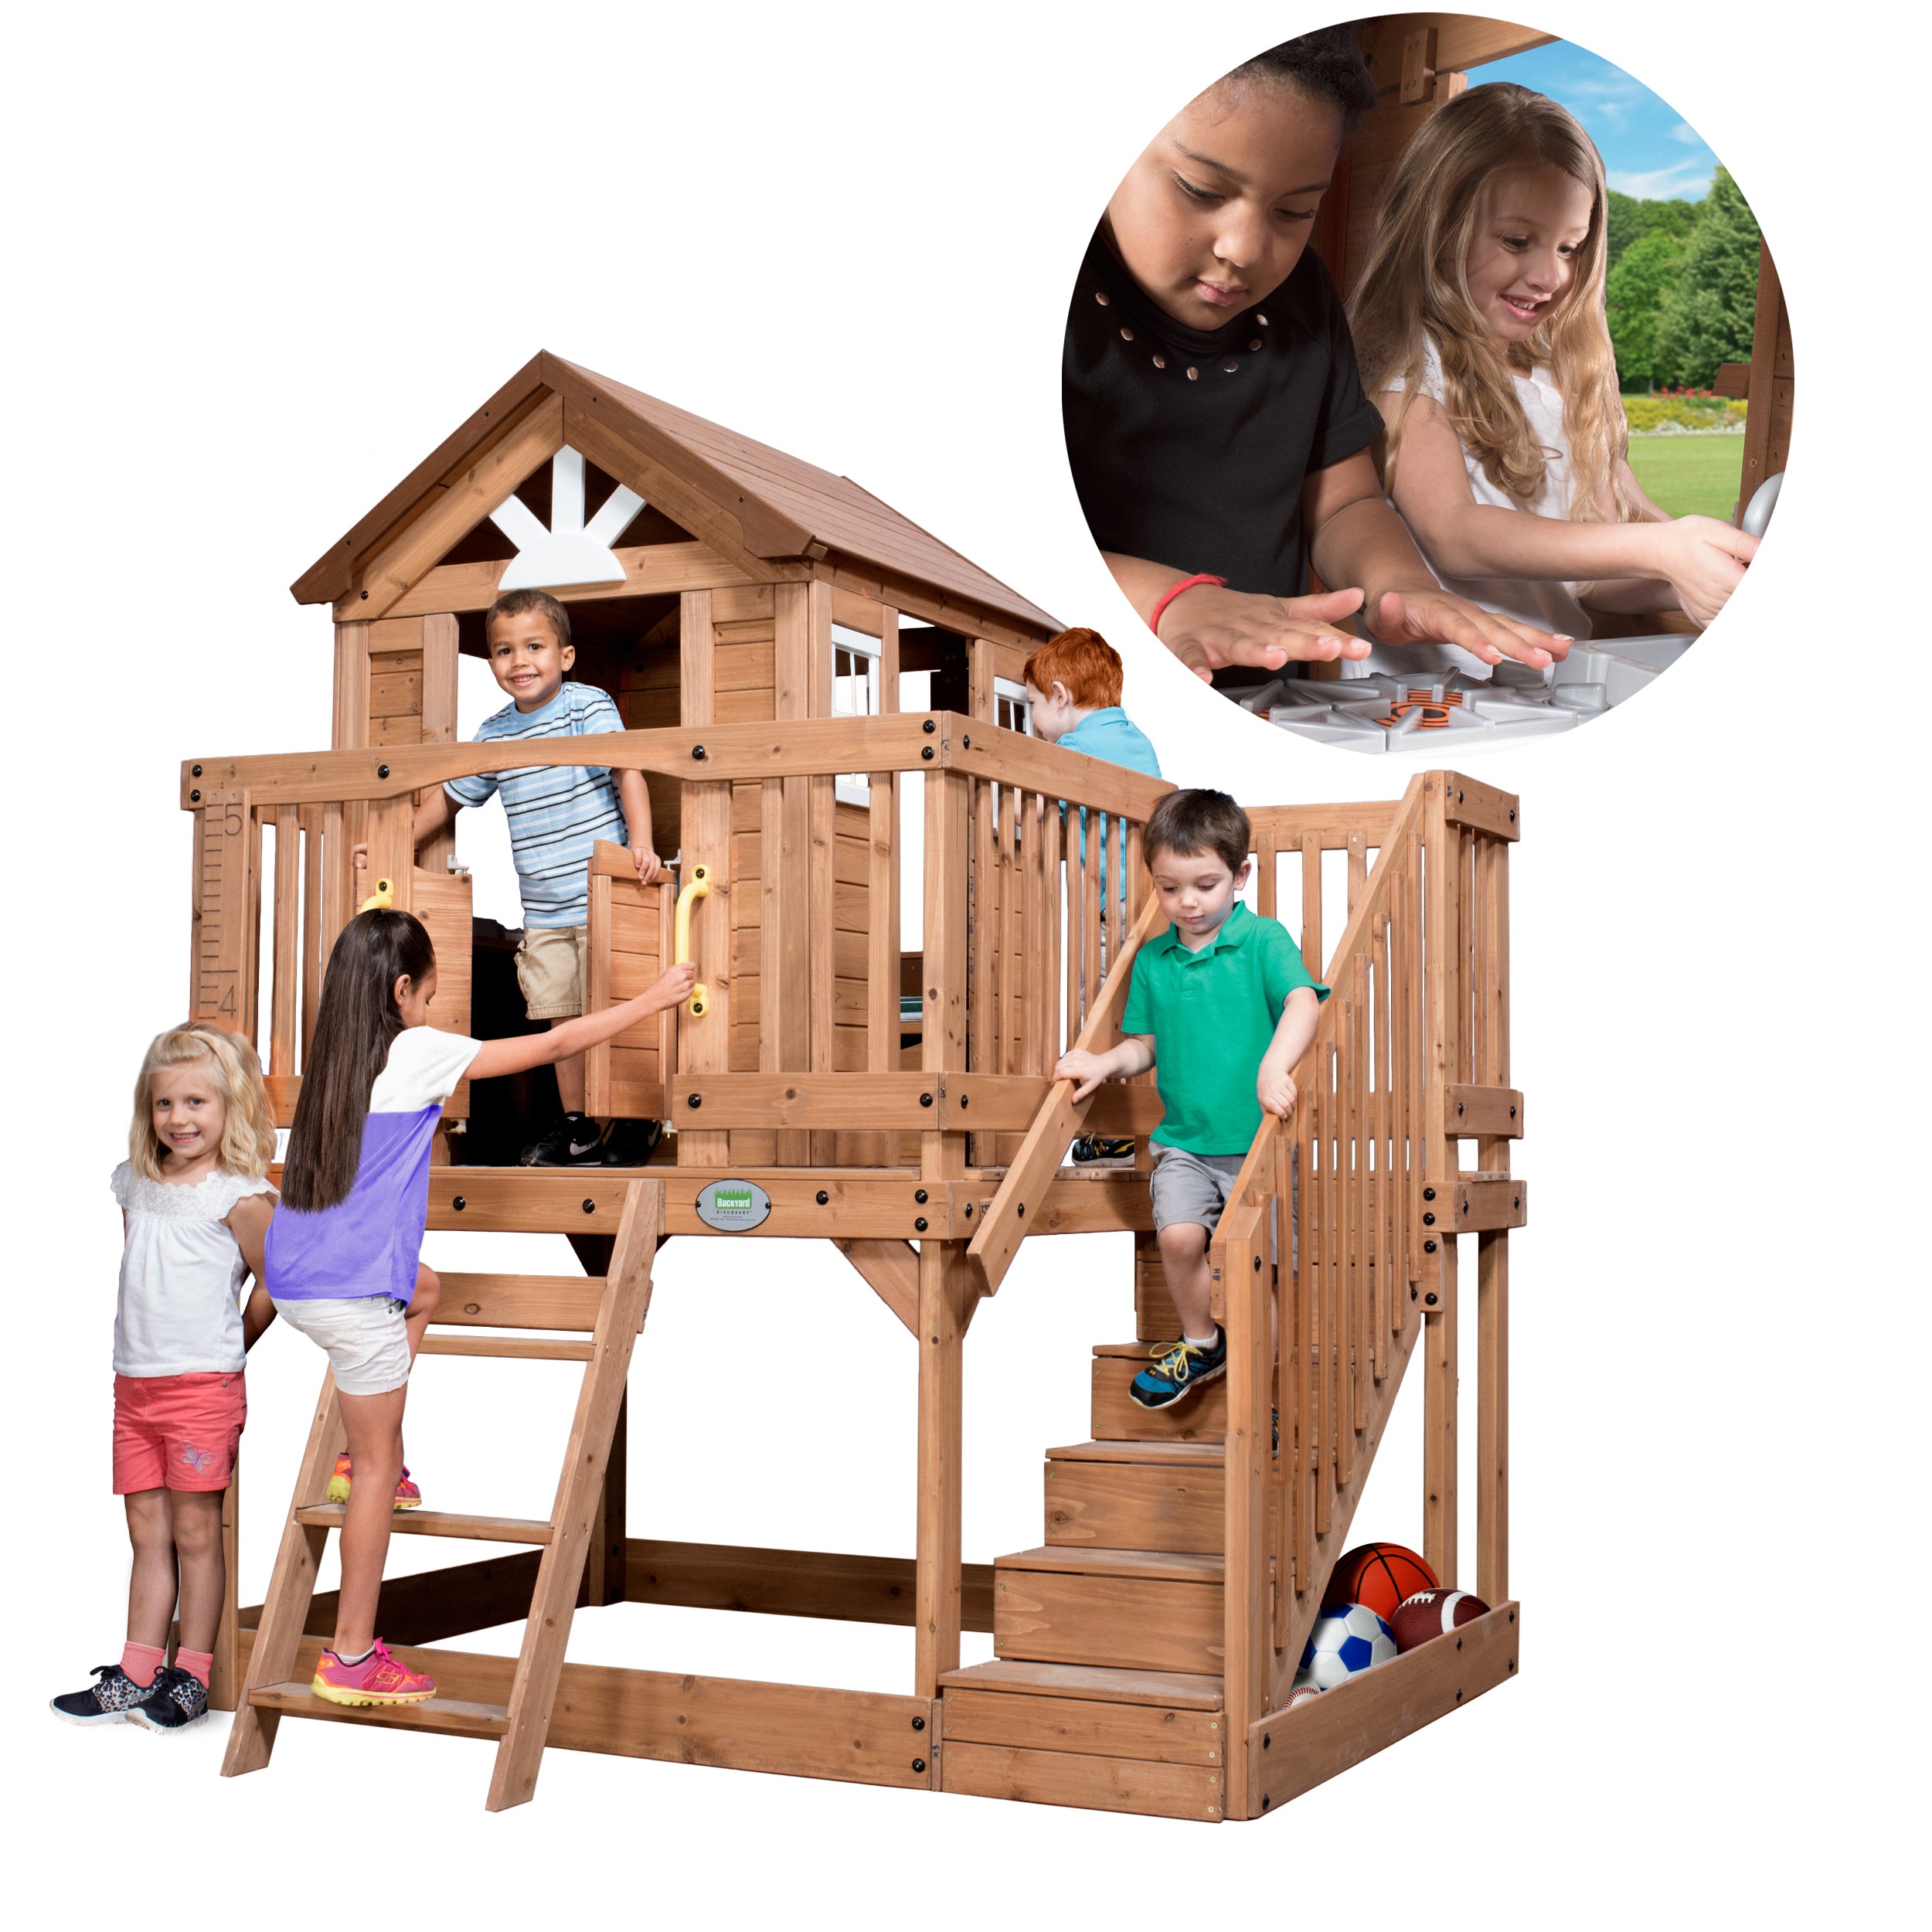 Outdoor Playhouses for Kids - Backyard Discovery